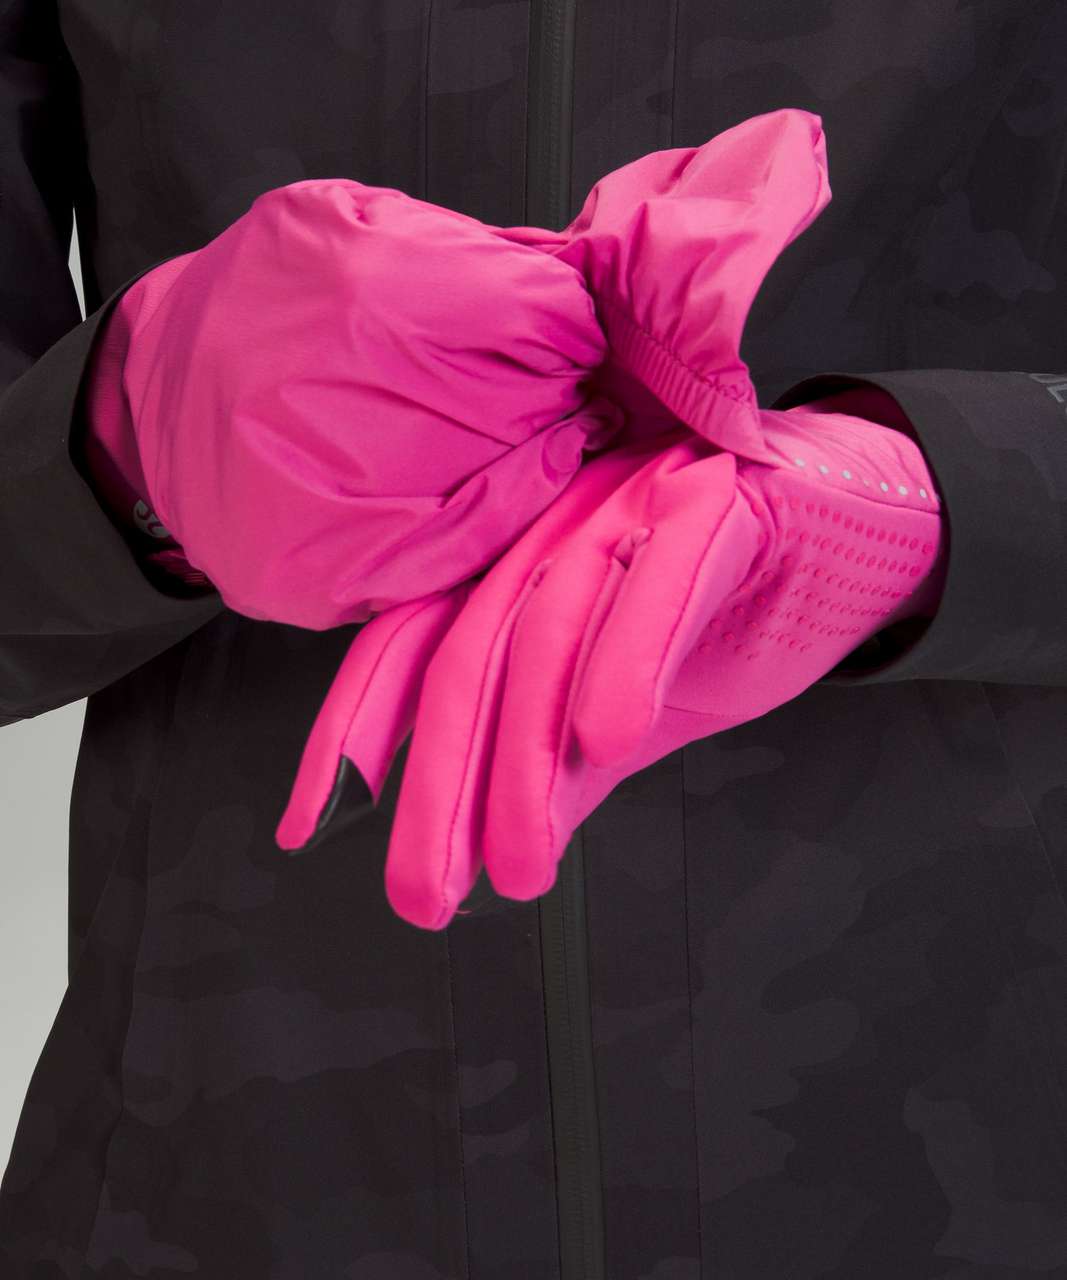 Lululemon Run for It All Hooded Gloves - Pink Lychee